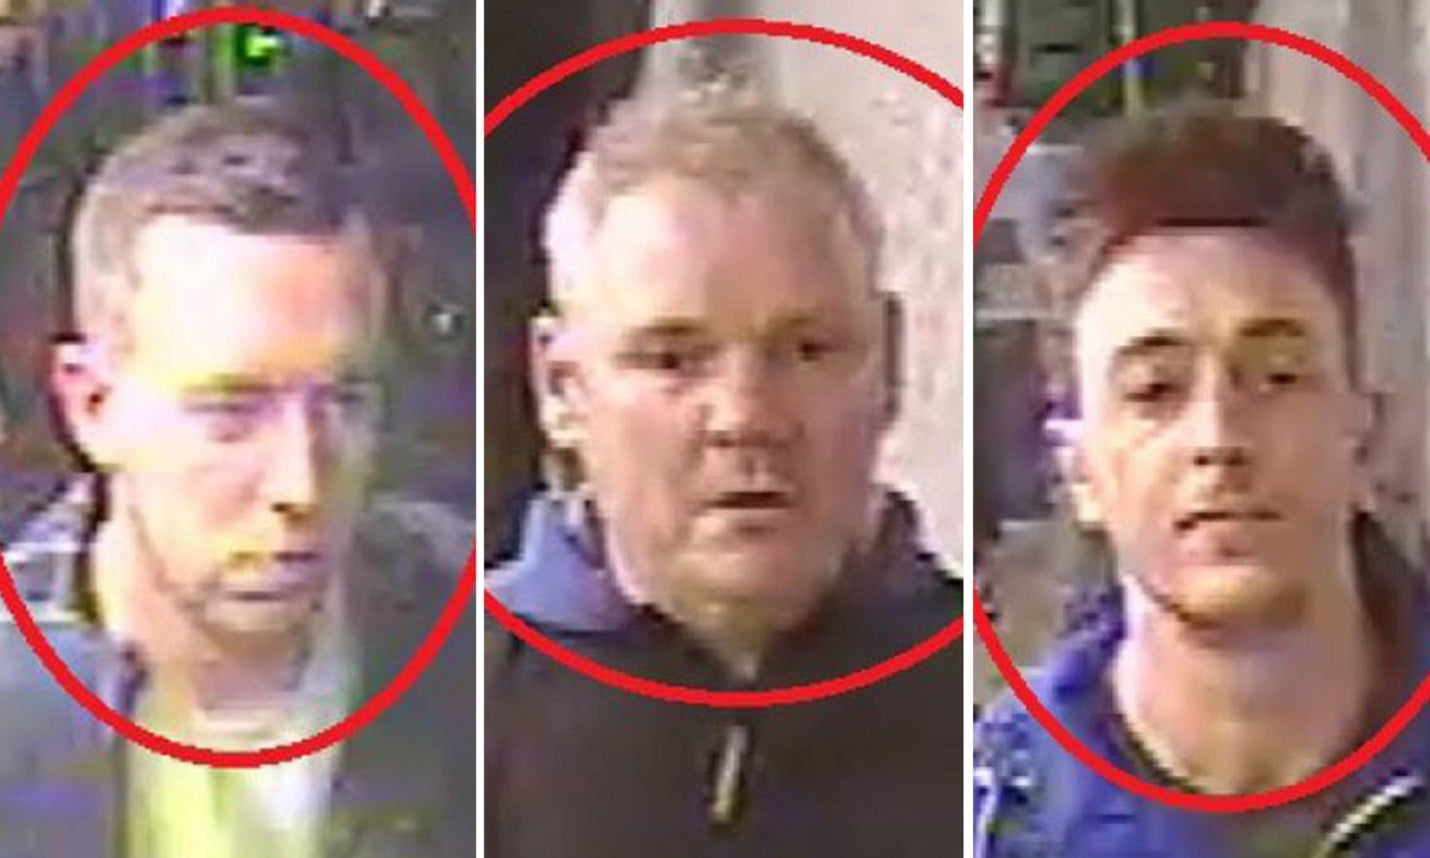 The three men identified by British police in connection with the incident.